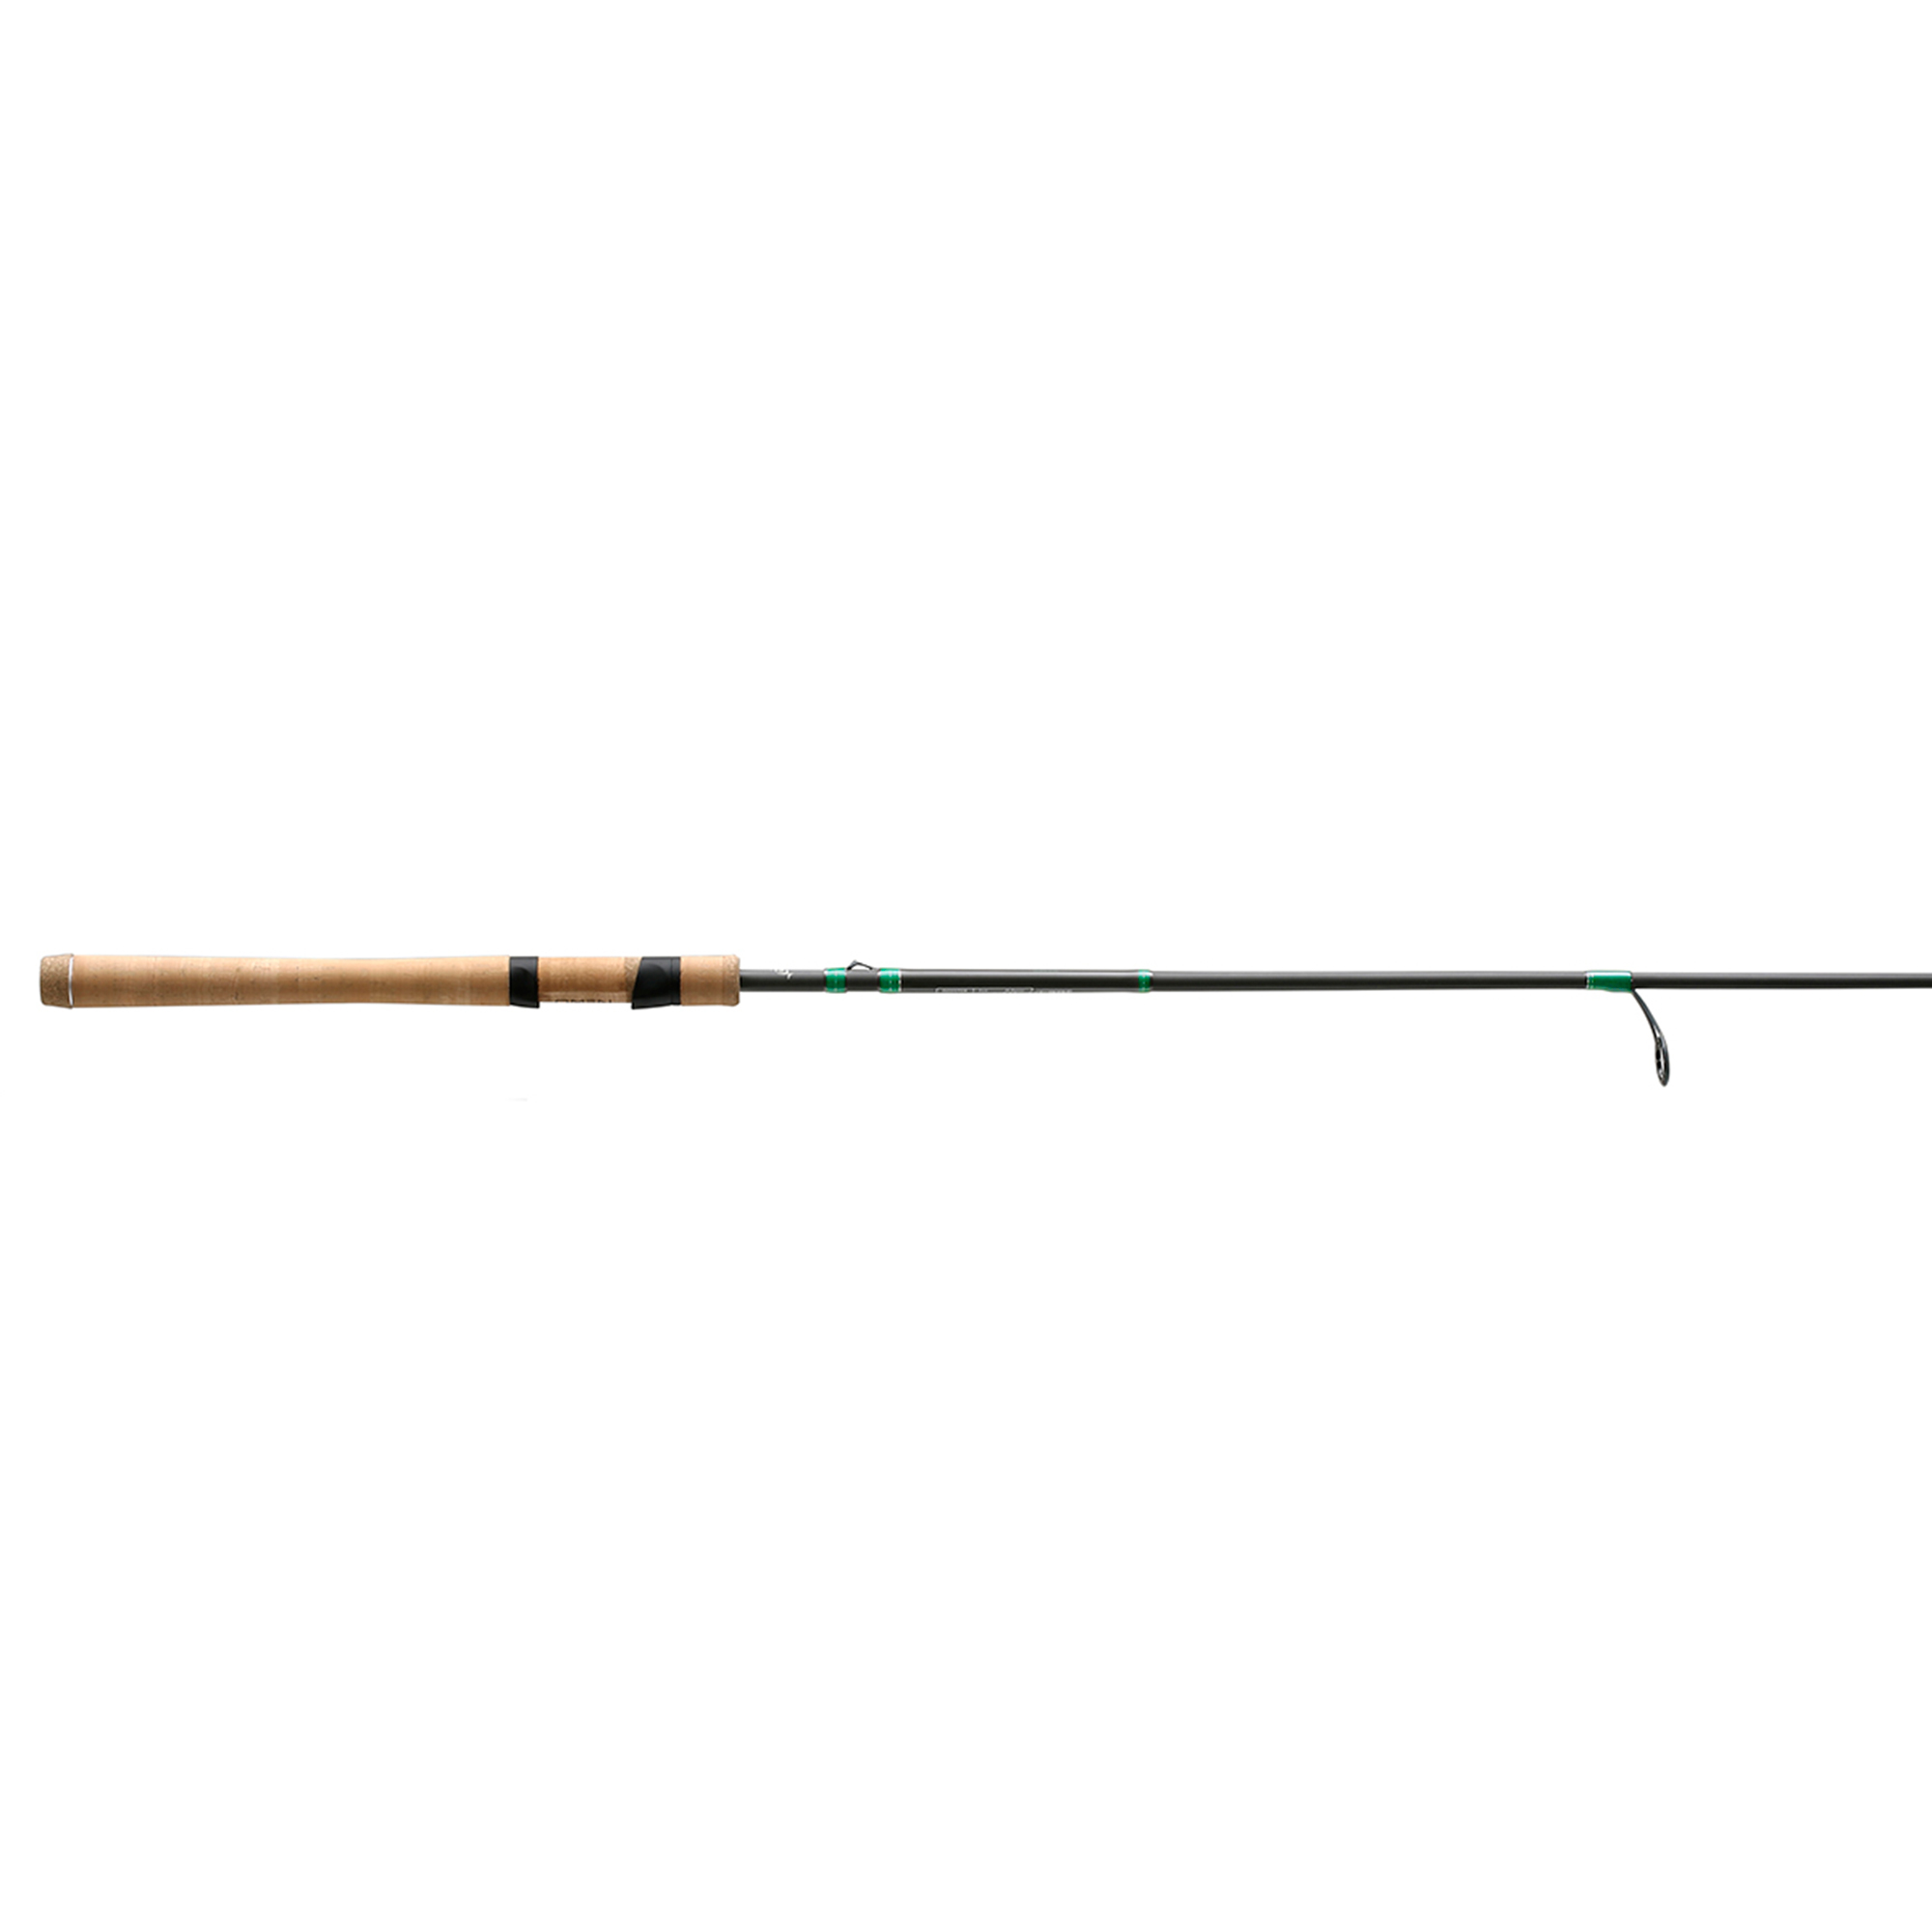 https://store.themeateater.com/on/demandware.static/-/Sites-meateater-master/default/dwc5ccd8d9/13-fishing-omen-green-spinning-rod/13-fishing-omen-green-spinning-rod_global_primary.jpg